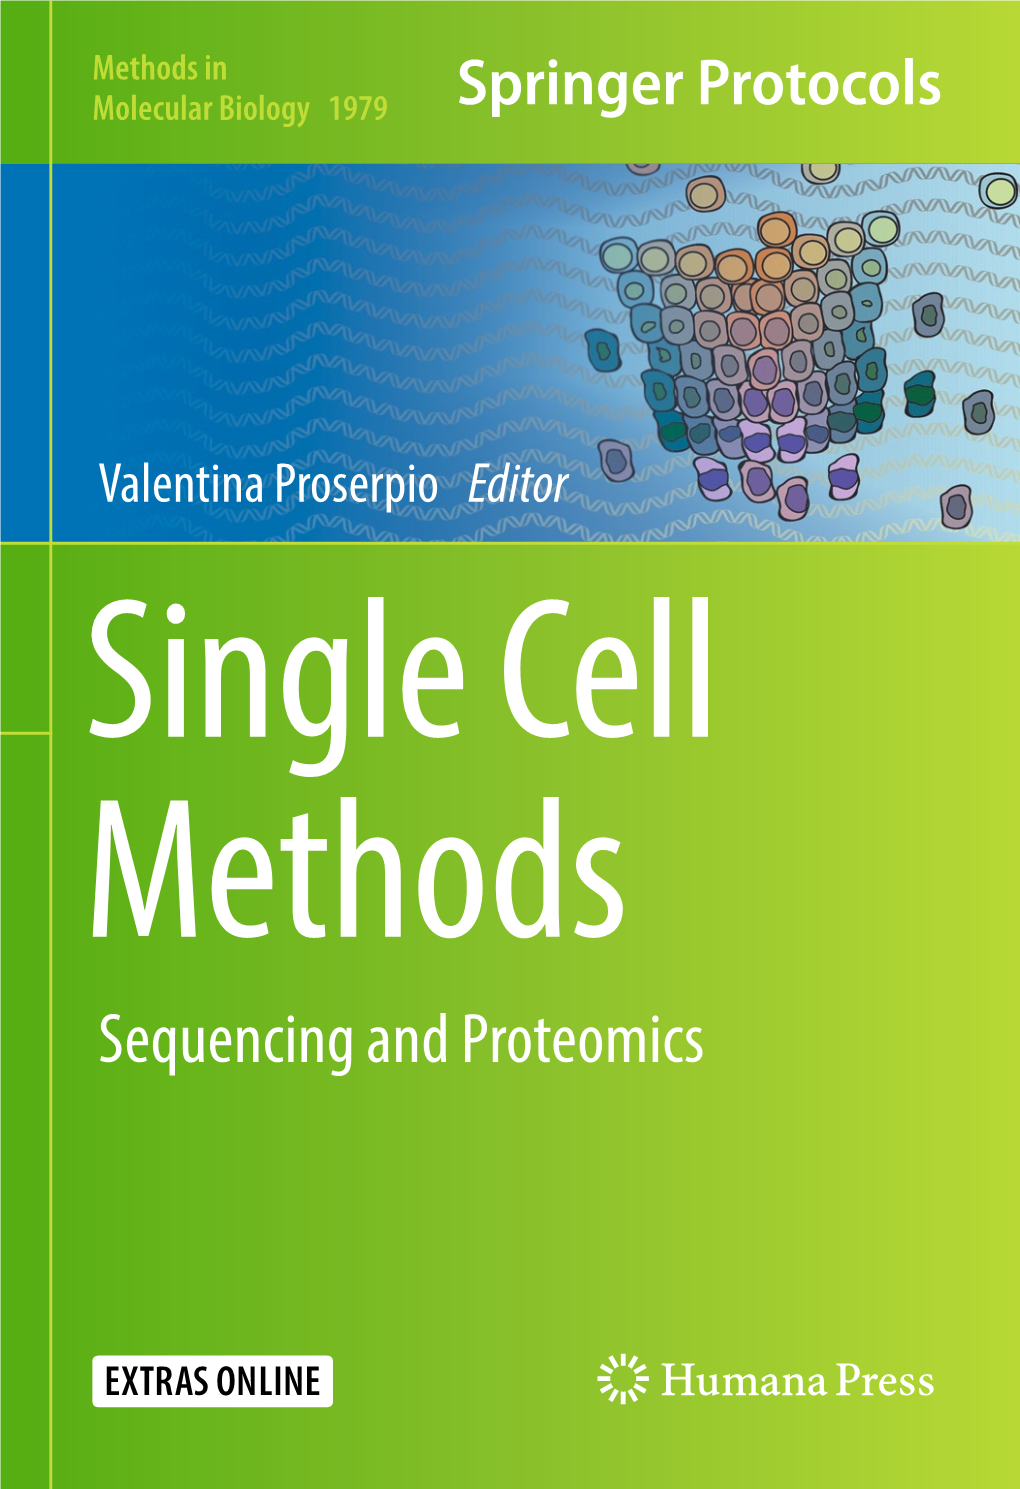 Sequencing and Proteomics M ETHODS in M OLECULAR B IOLOGY